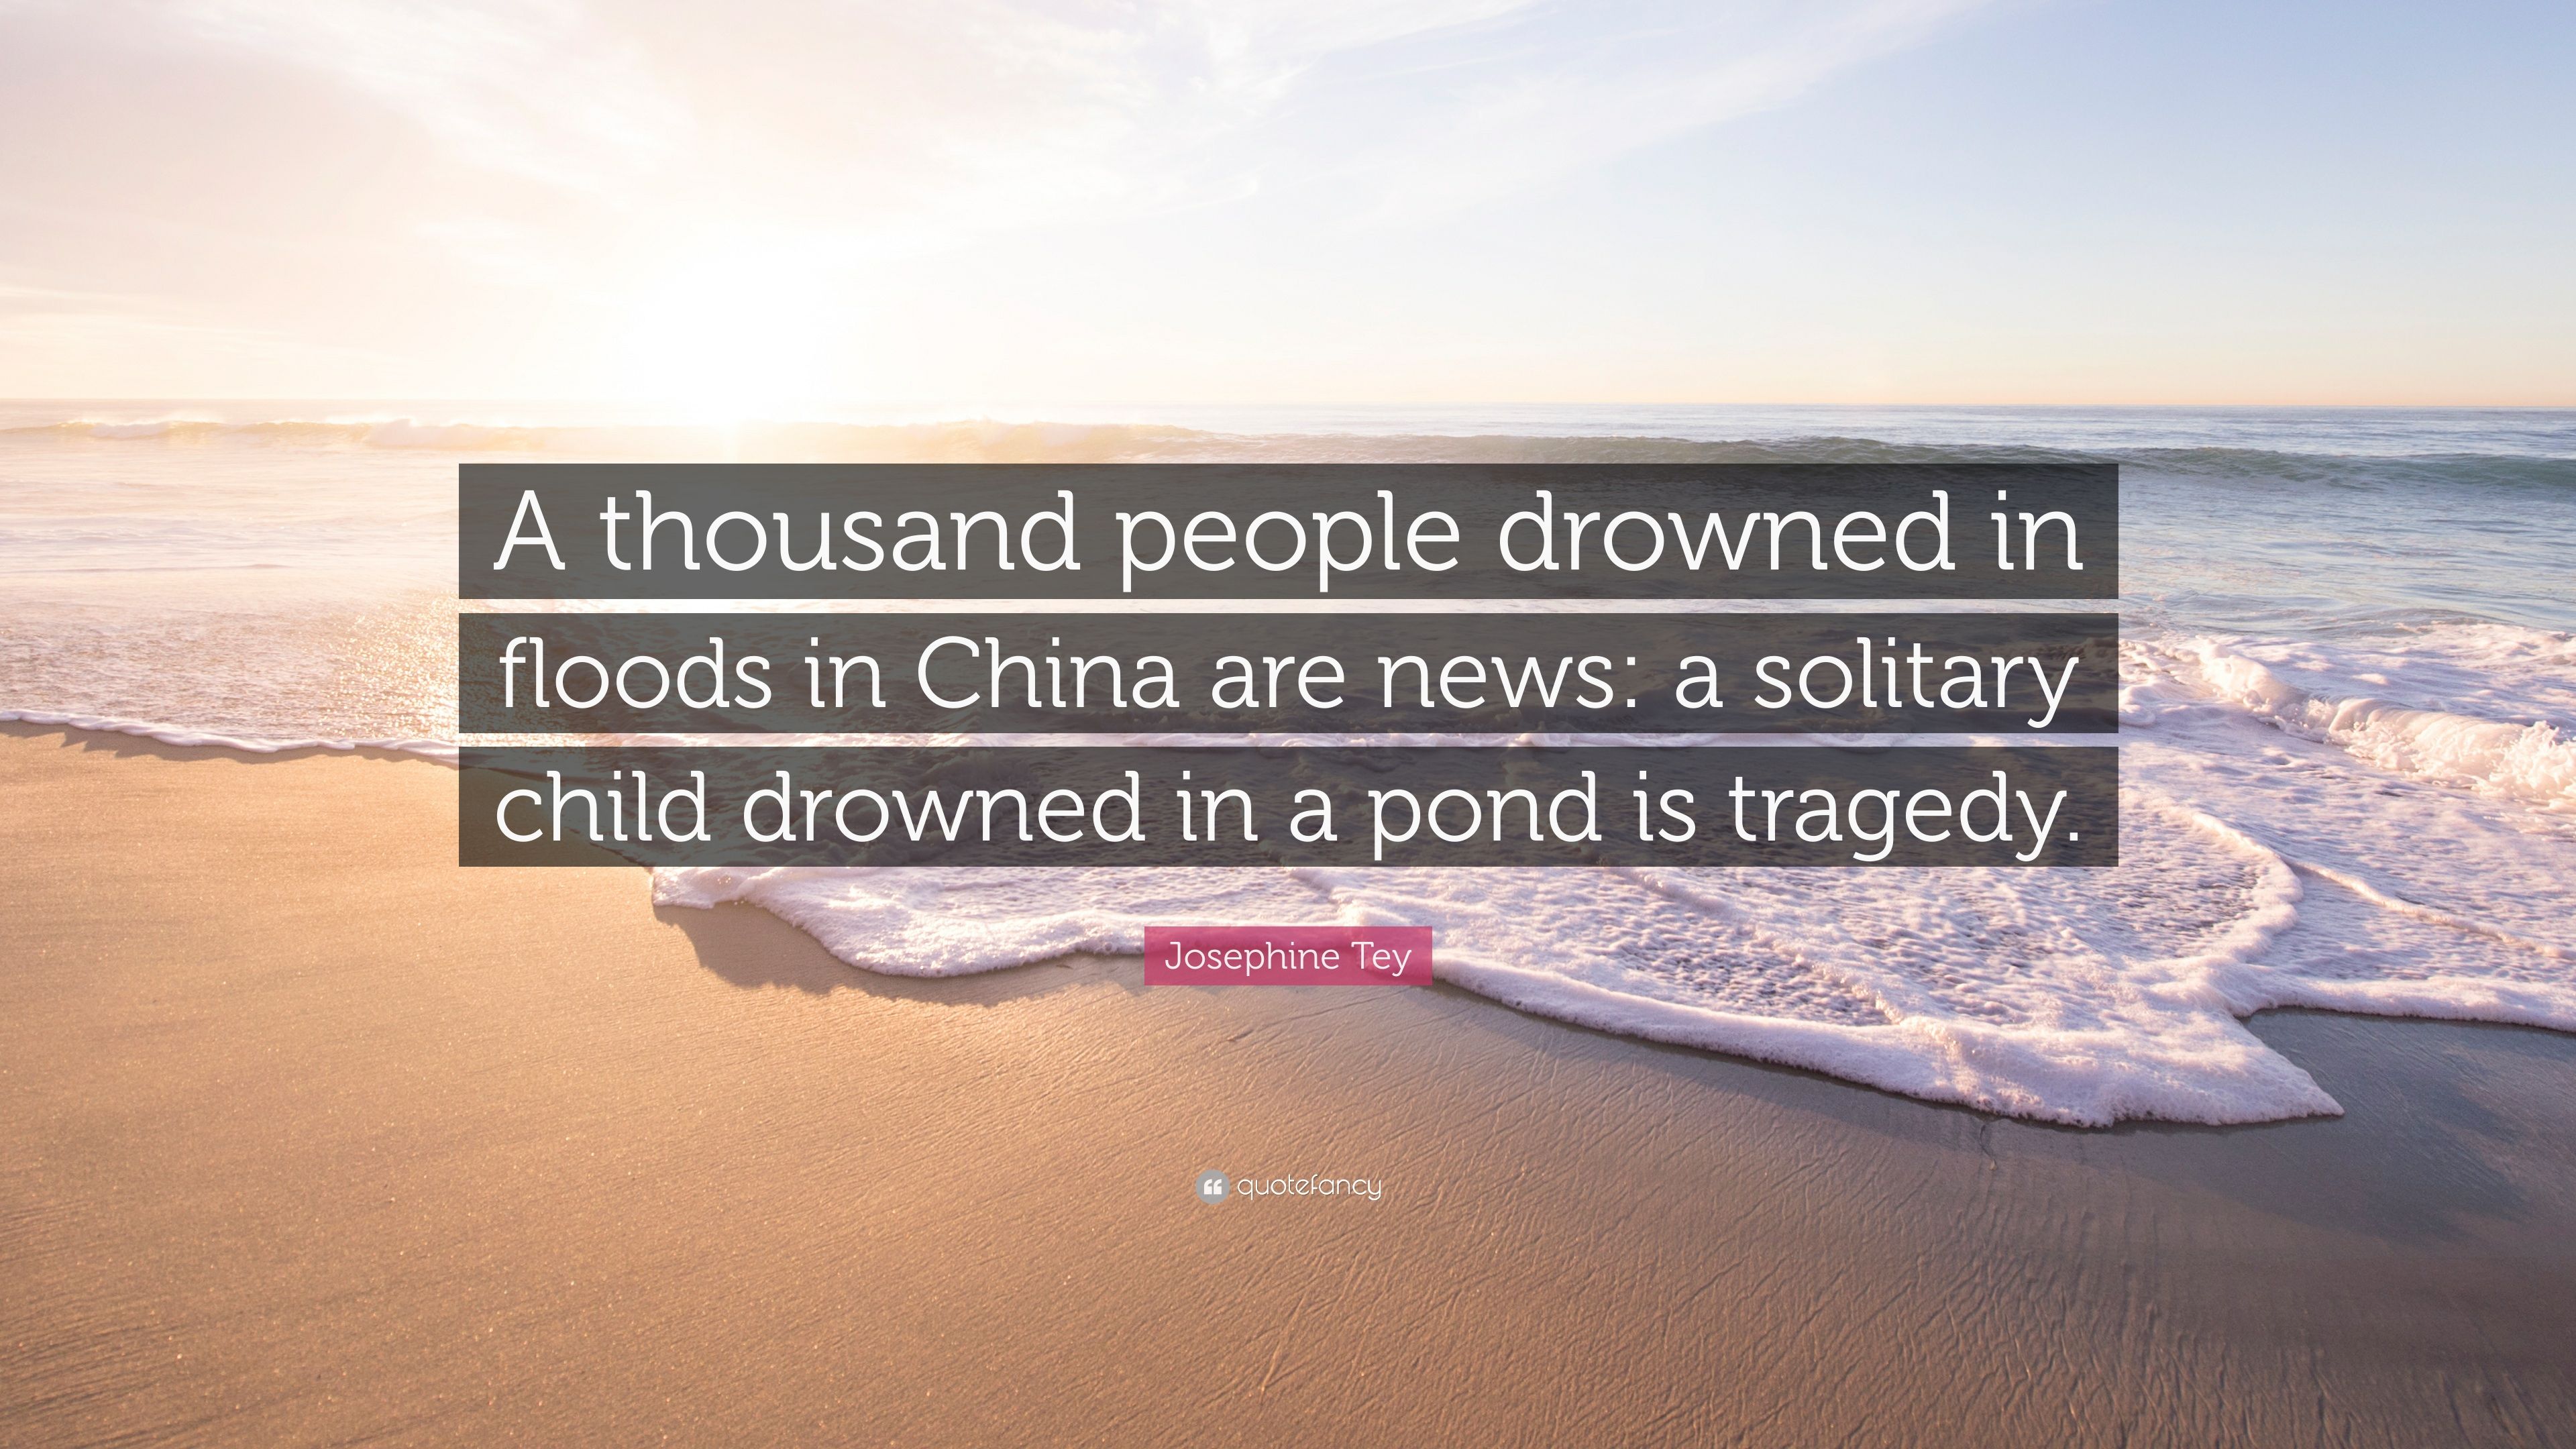 Josephine Tey Quote: “A thousand people drowned in floods in China